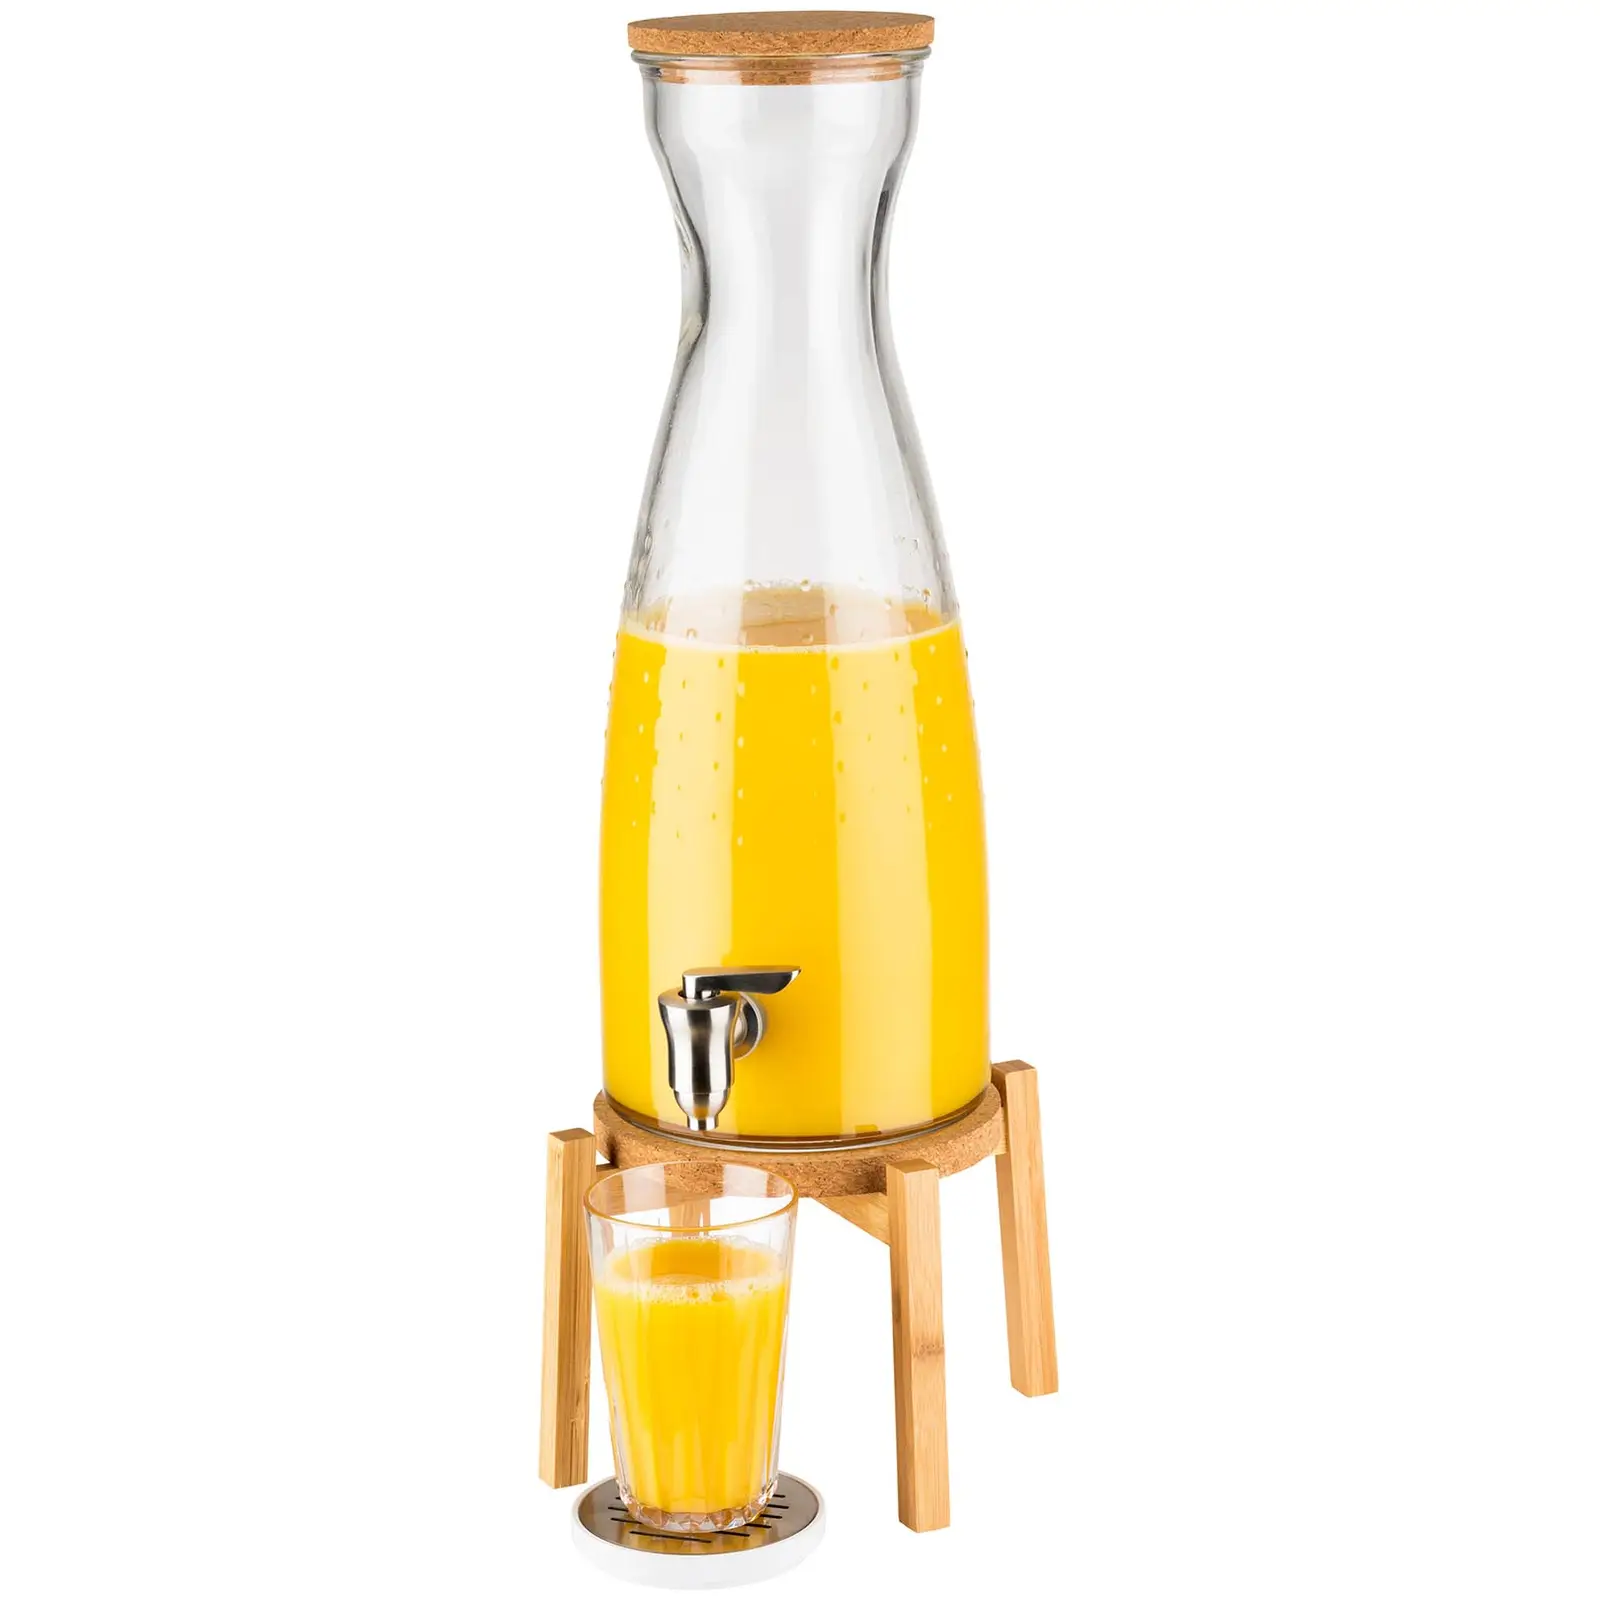 Juice Dispenser - 4.5 L - Glass, stainless steel, silicone, wood, cork